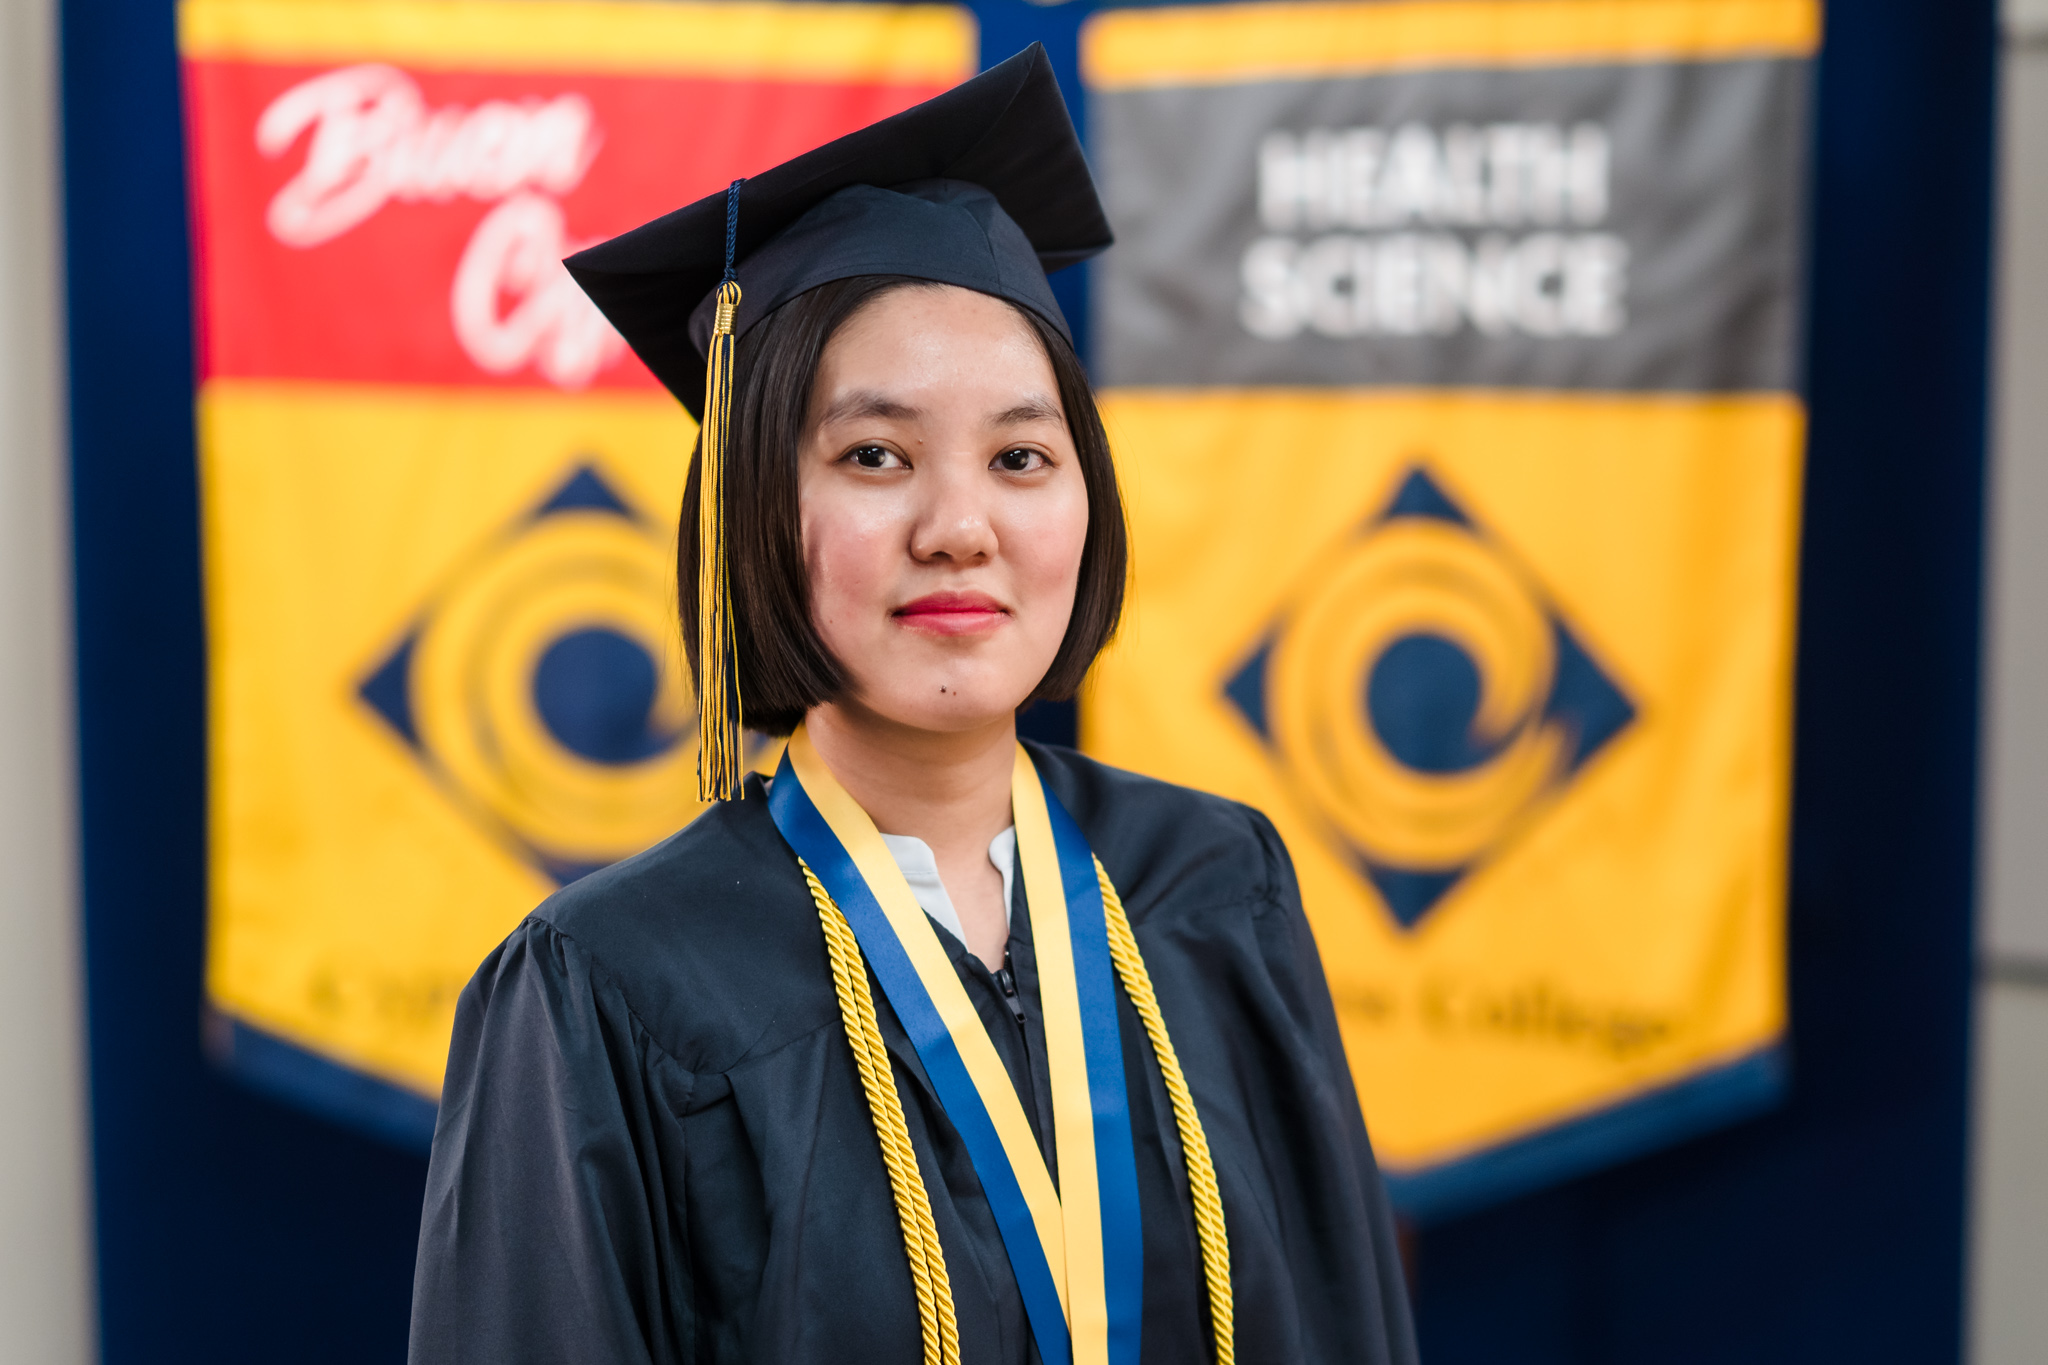 Student Pauline Lim poses with "We Journey Together" pennant as she wears graduation regalia and stands on the piazza.